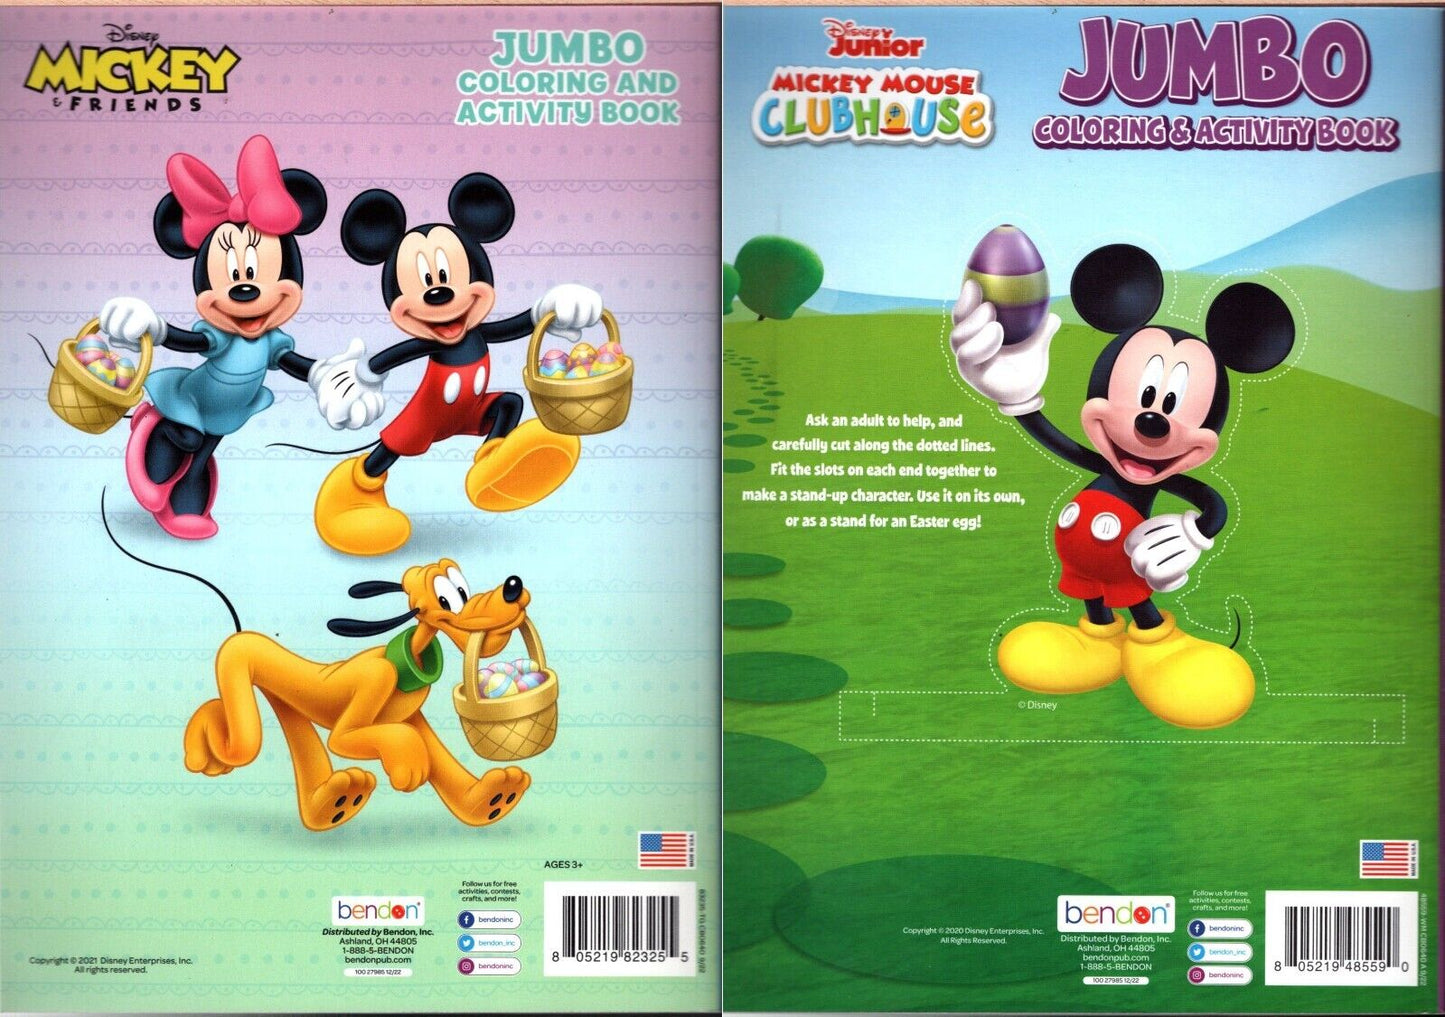 Disney Mickey Friends - Jumbo Coloring & Activity Book - Swing into Spring Set